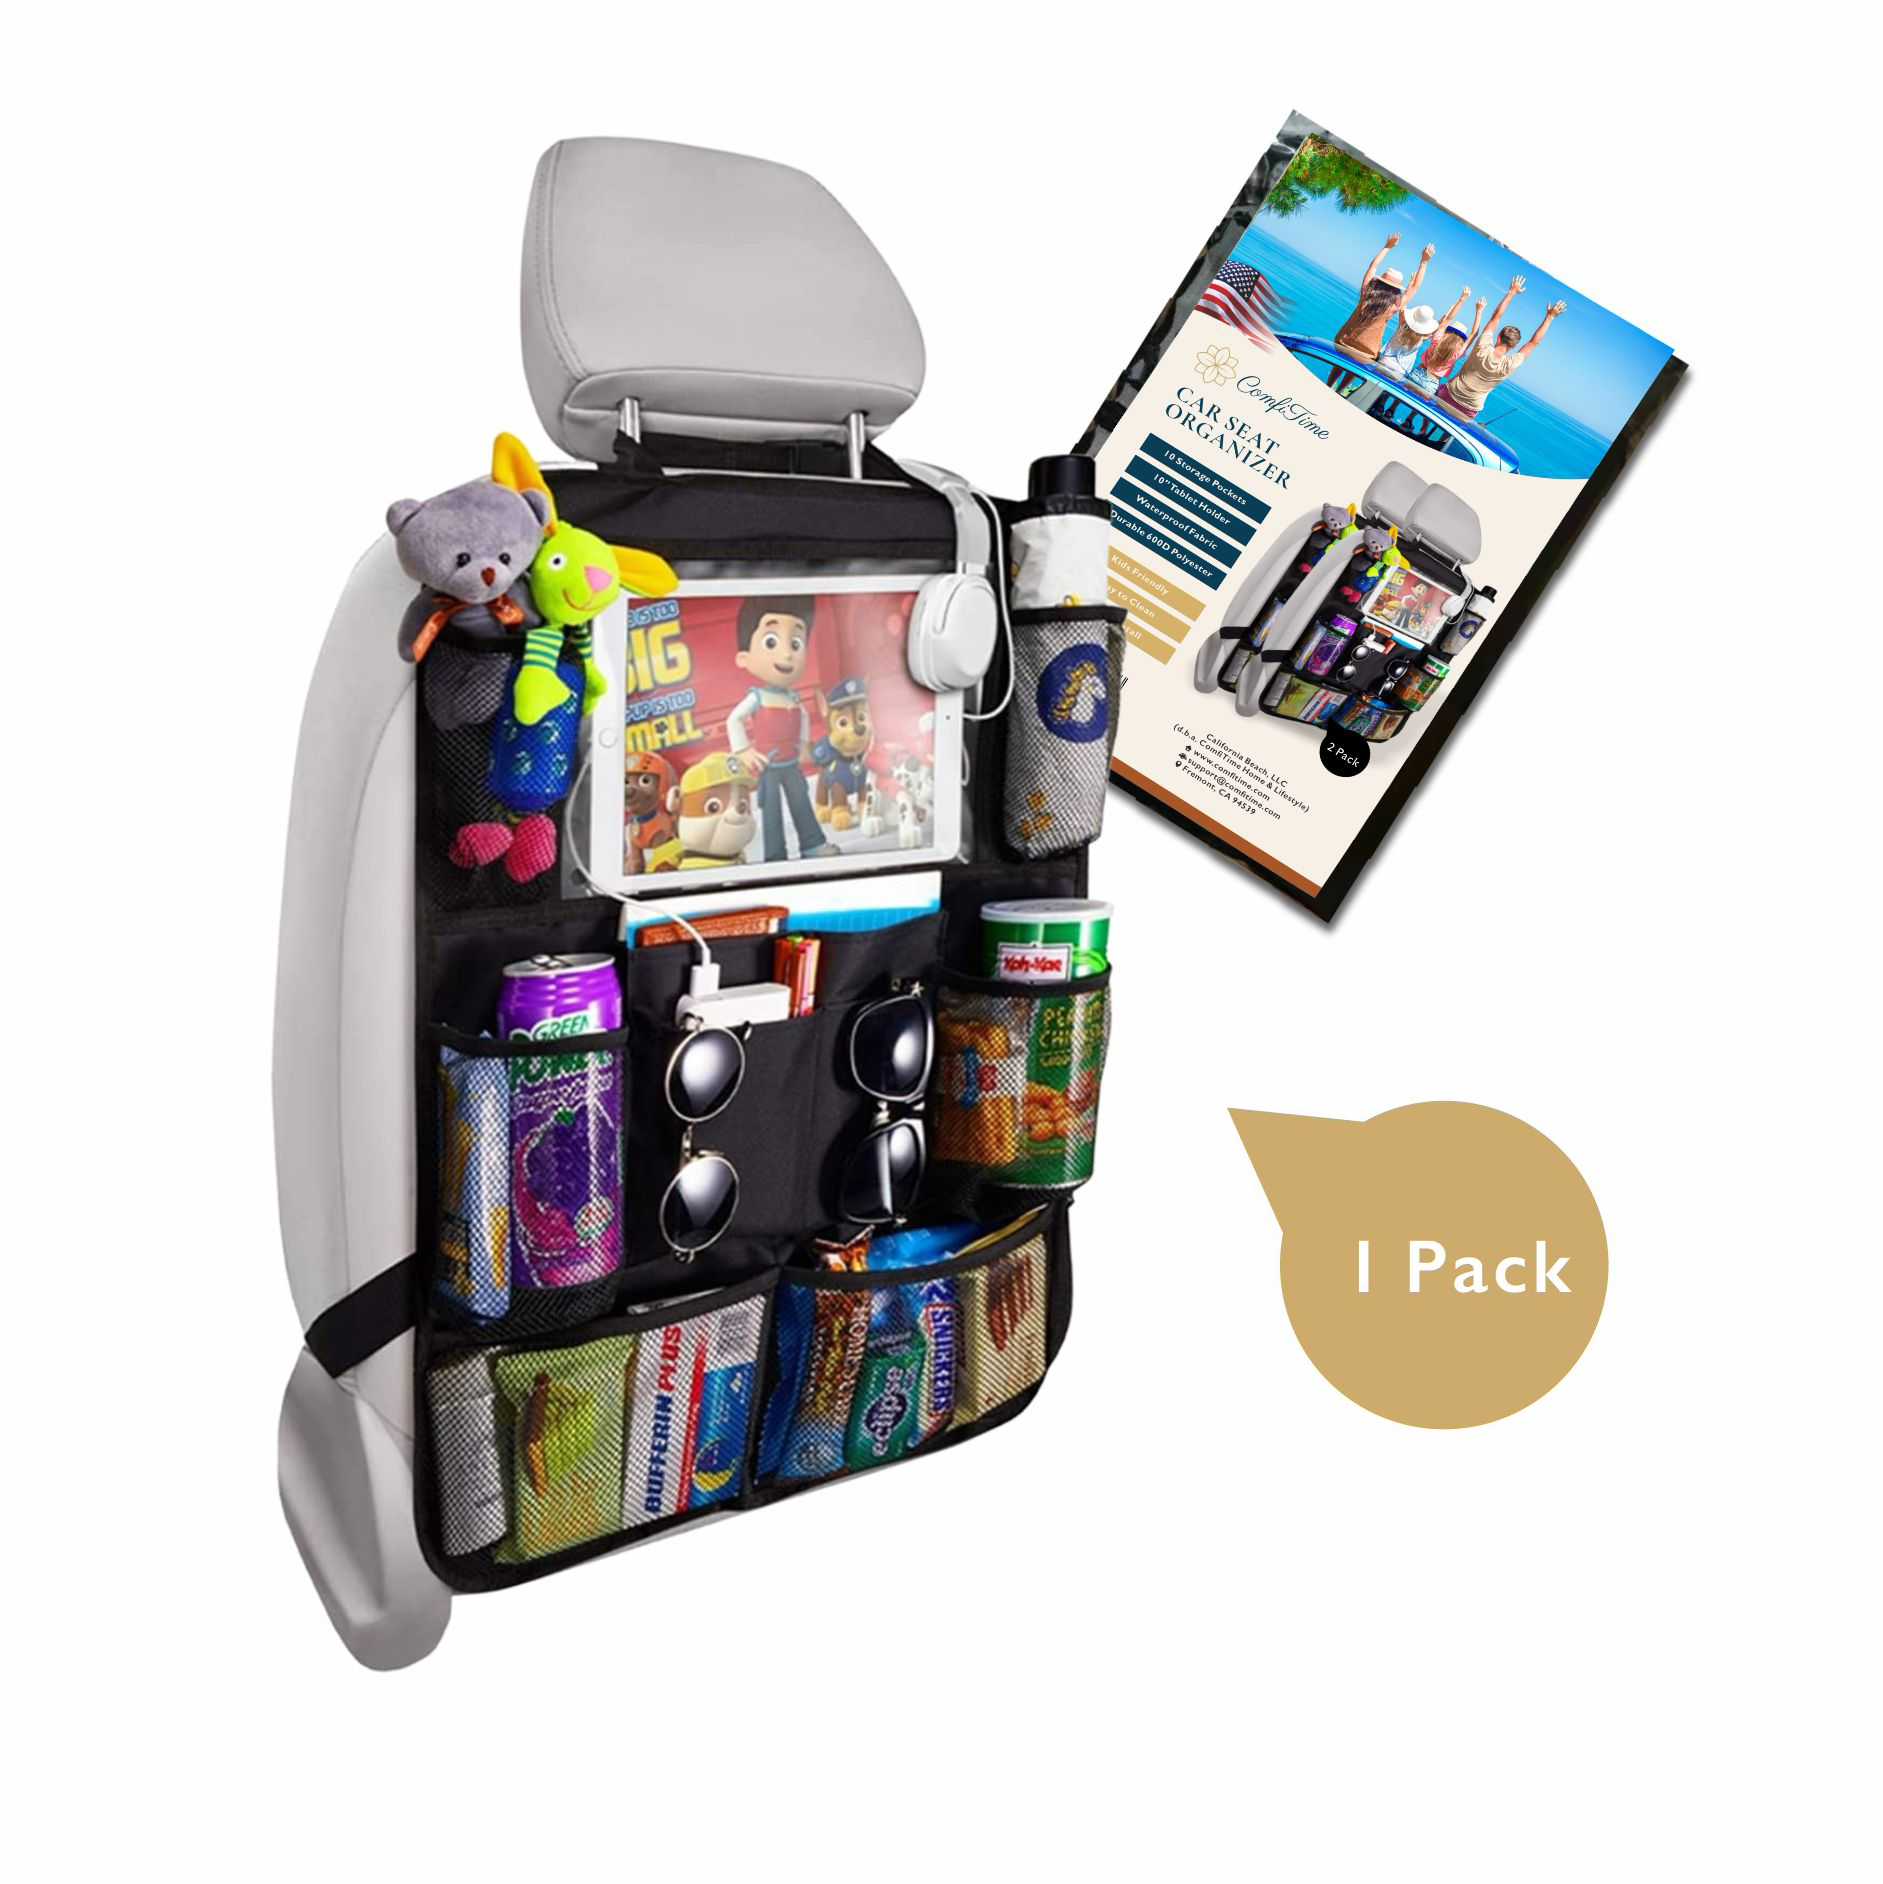 Folds Flat for Easy Trunk Storage. Plenty of Space to Neatly Store and Organize Your Kids Books Toys Games and Snacks While Traveling A Must for Long Road Trips Back Seat Car Organizer 